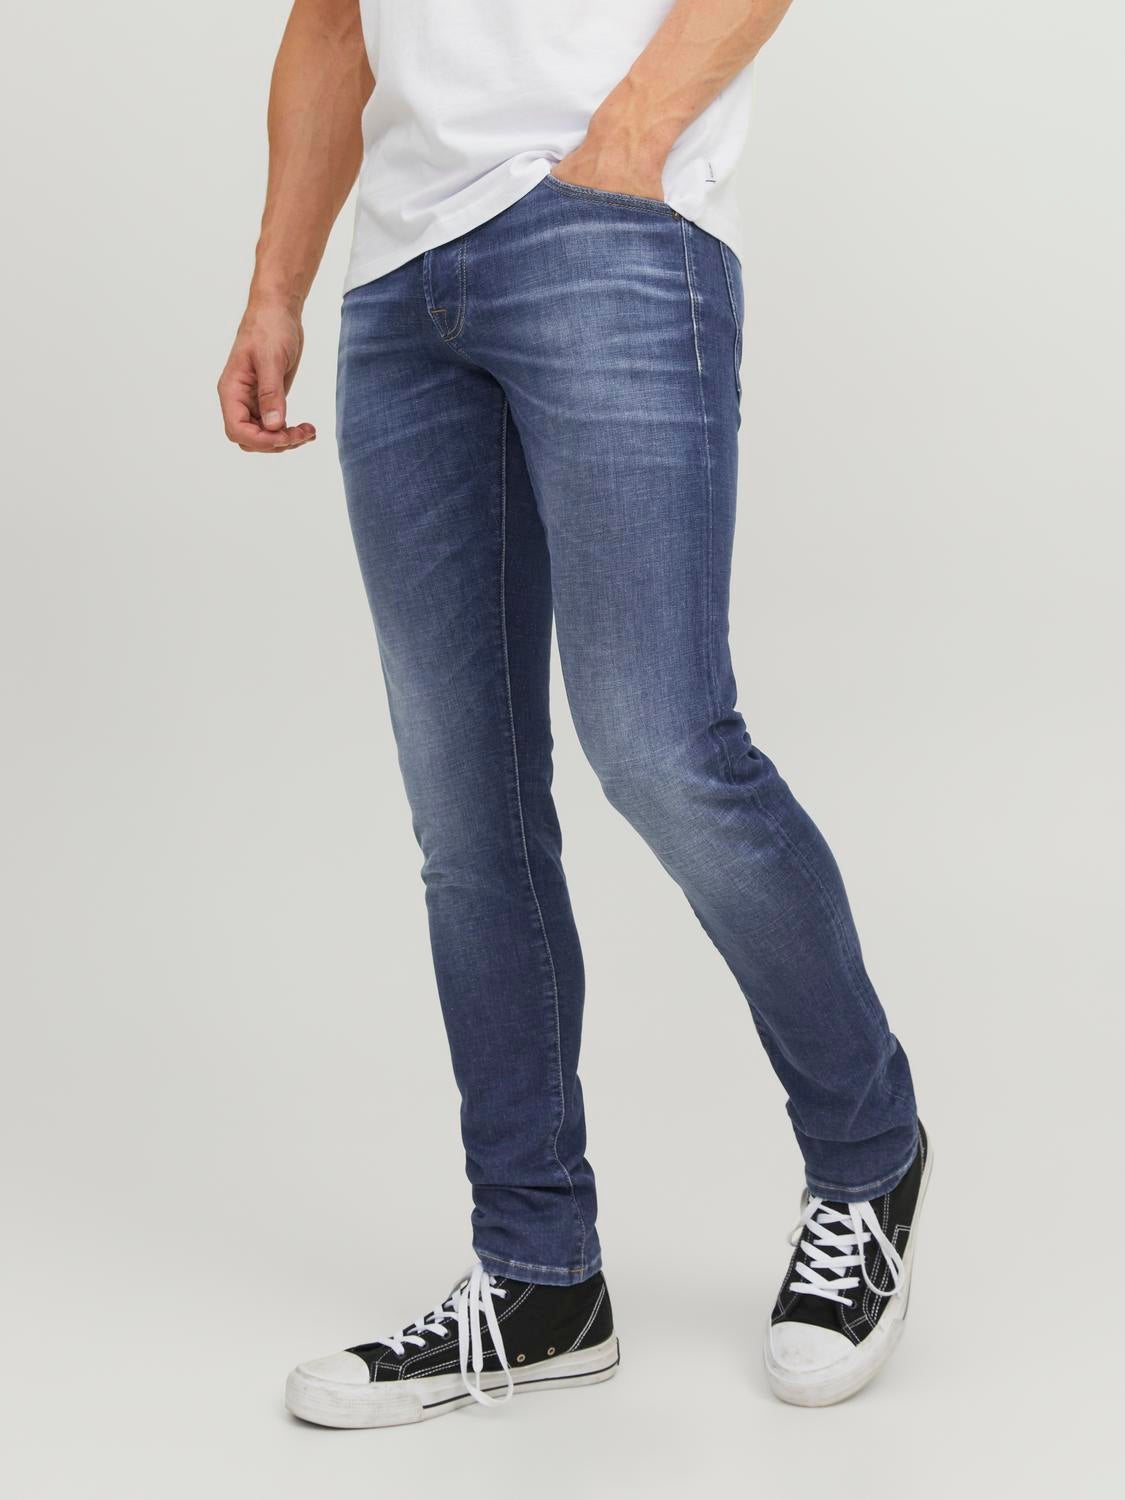 Wholesale Mens Jack And Jones Jeans Supplier from Delhi India